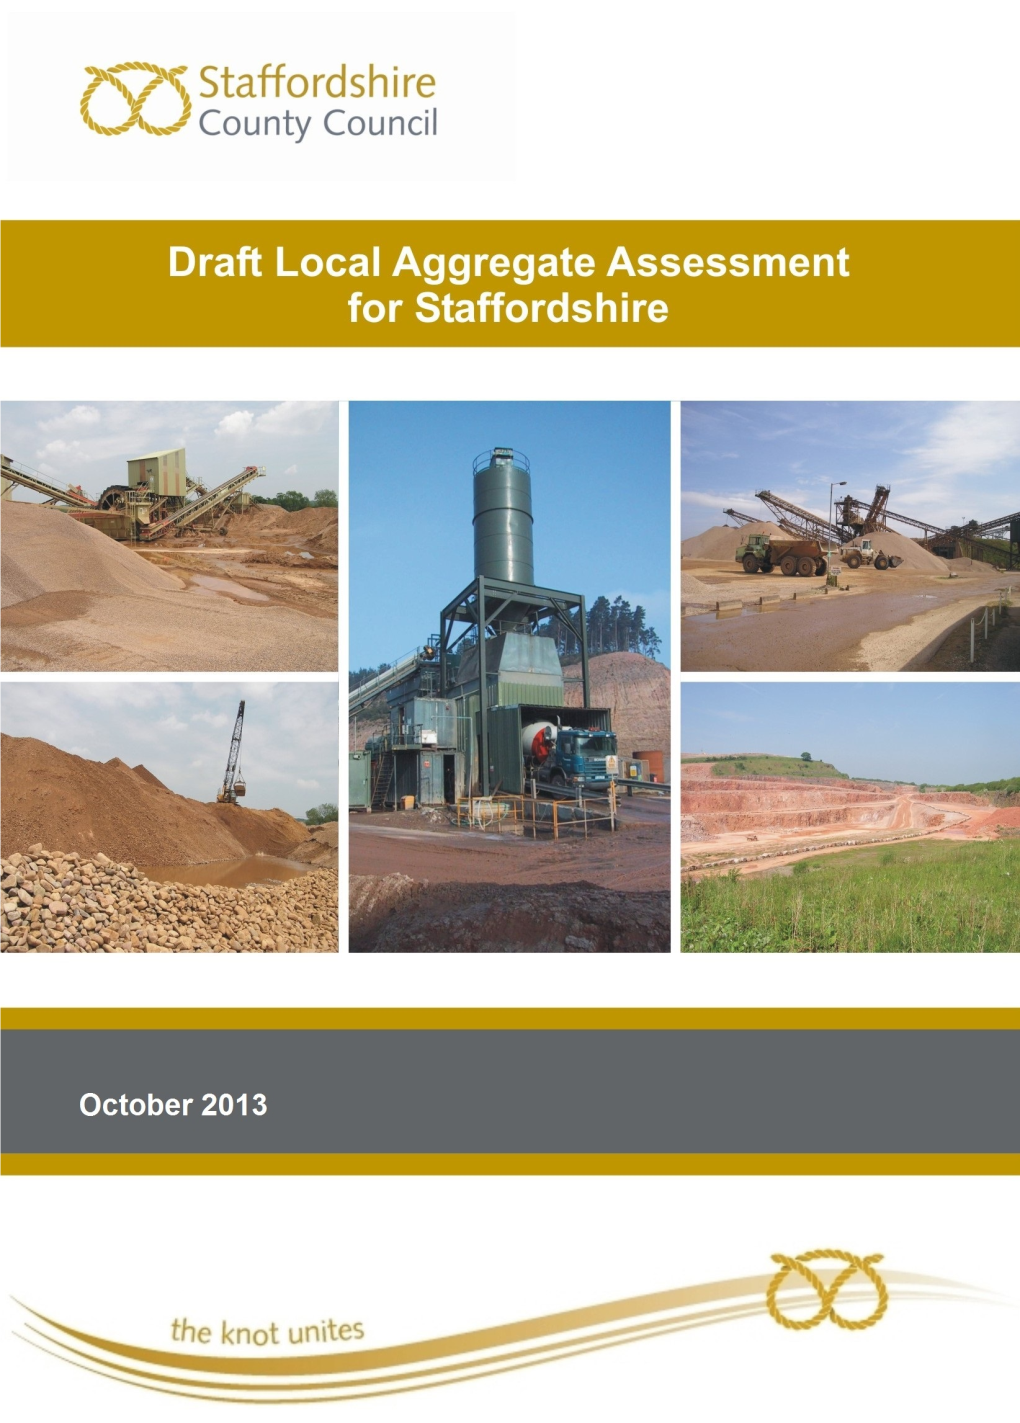 Draft Local Aggregate Assessment for Staffordshire